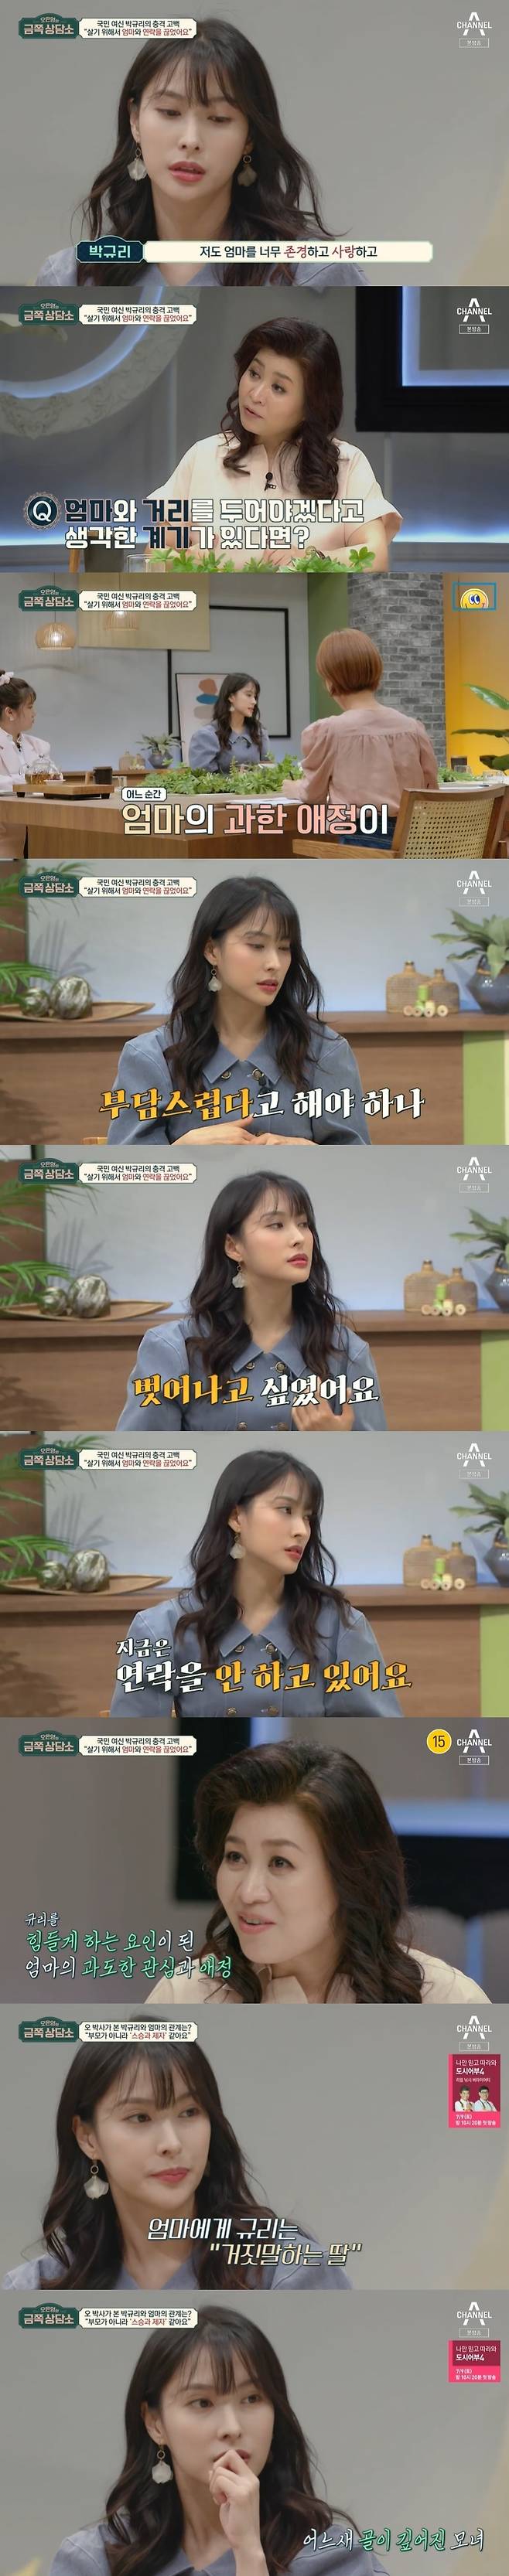 Seoul) = Park Gyuri has frankly revealed his relationship with his mother.In the channel A entertainment program Oh Eun Youngs Golden Counseling Center broadcasted on the 24th, KARA member Park Gyuri appeared and said, I liked my mother but now I think I should keep a distance.Park Gyuri said, In fact, I admire and love my mother so much, she has so much affection for me, but at some point, the excessive affection itself was burdensome.My parents are the only daughters born at a late age. The love that was completely focused was a burden.I wanted to get out because I could not follow my affection. So I put my distance. Park Gyuri also said, Do not you want your parents to do anything? I have to express it so much, but I am very sorry that I do not do it.I felt the burden because that part did not fit. I am not in touch with you for a while now, I have been in contact with you every day, since the end of last year, Oh Eun Young Doctorate said.Oh Eun Young Doctorate, who heard his situation, said, My mother has a lot of love, so it is okay when Mr. Kyuri is comfortable. Now the bowl is small, so sometimes the love is not contained.I will be burdened, but I will not like myself to say that it is burdensome. Park Gyuri sympathized and said, So the conclusion seems to be my fault. Park Gyuri said, My mother, who is a voice actor, knows the entertainment industry well, so she kept talking about the right life of a female entertainer, and she grew up listening to it.I had a feeling that I could not show it was not right. My parents wanted me to tell them everything openly.Park Gyuri said: I was a heterosexual, but I didnt always speak first, it was always taken while keeping secrets, so I became a daughter who always lied to her mother.So I could not talk more. Oh Eun Young Doctorate said, It is very likely that I lived a life to meet my mothers expectations.If I have a lot of difference from my reality, I feel guilty. I am sorry for my parents and I am not stupid.Its always a feeling of being a sinner, Park Gyuri said, again accepting.Park Gyuri said, My mother wants to be feminine and neat, but I like to be hairy, drink and play.In his Confessions, Oh Eun Young Doctorate advised that human beings should have good self-function to live happily, and when their self-function is large and hard, they are comfortable and happy.